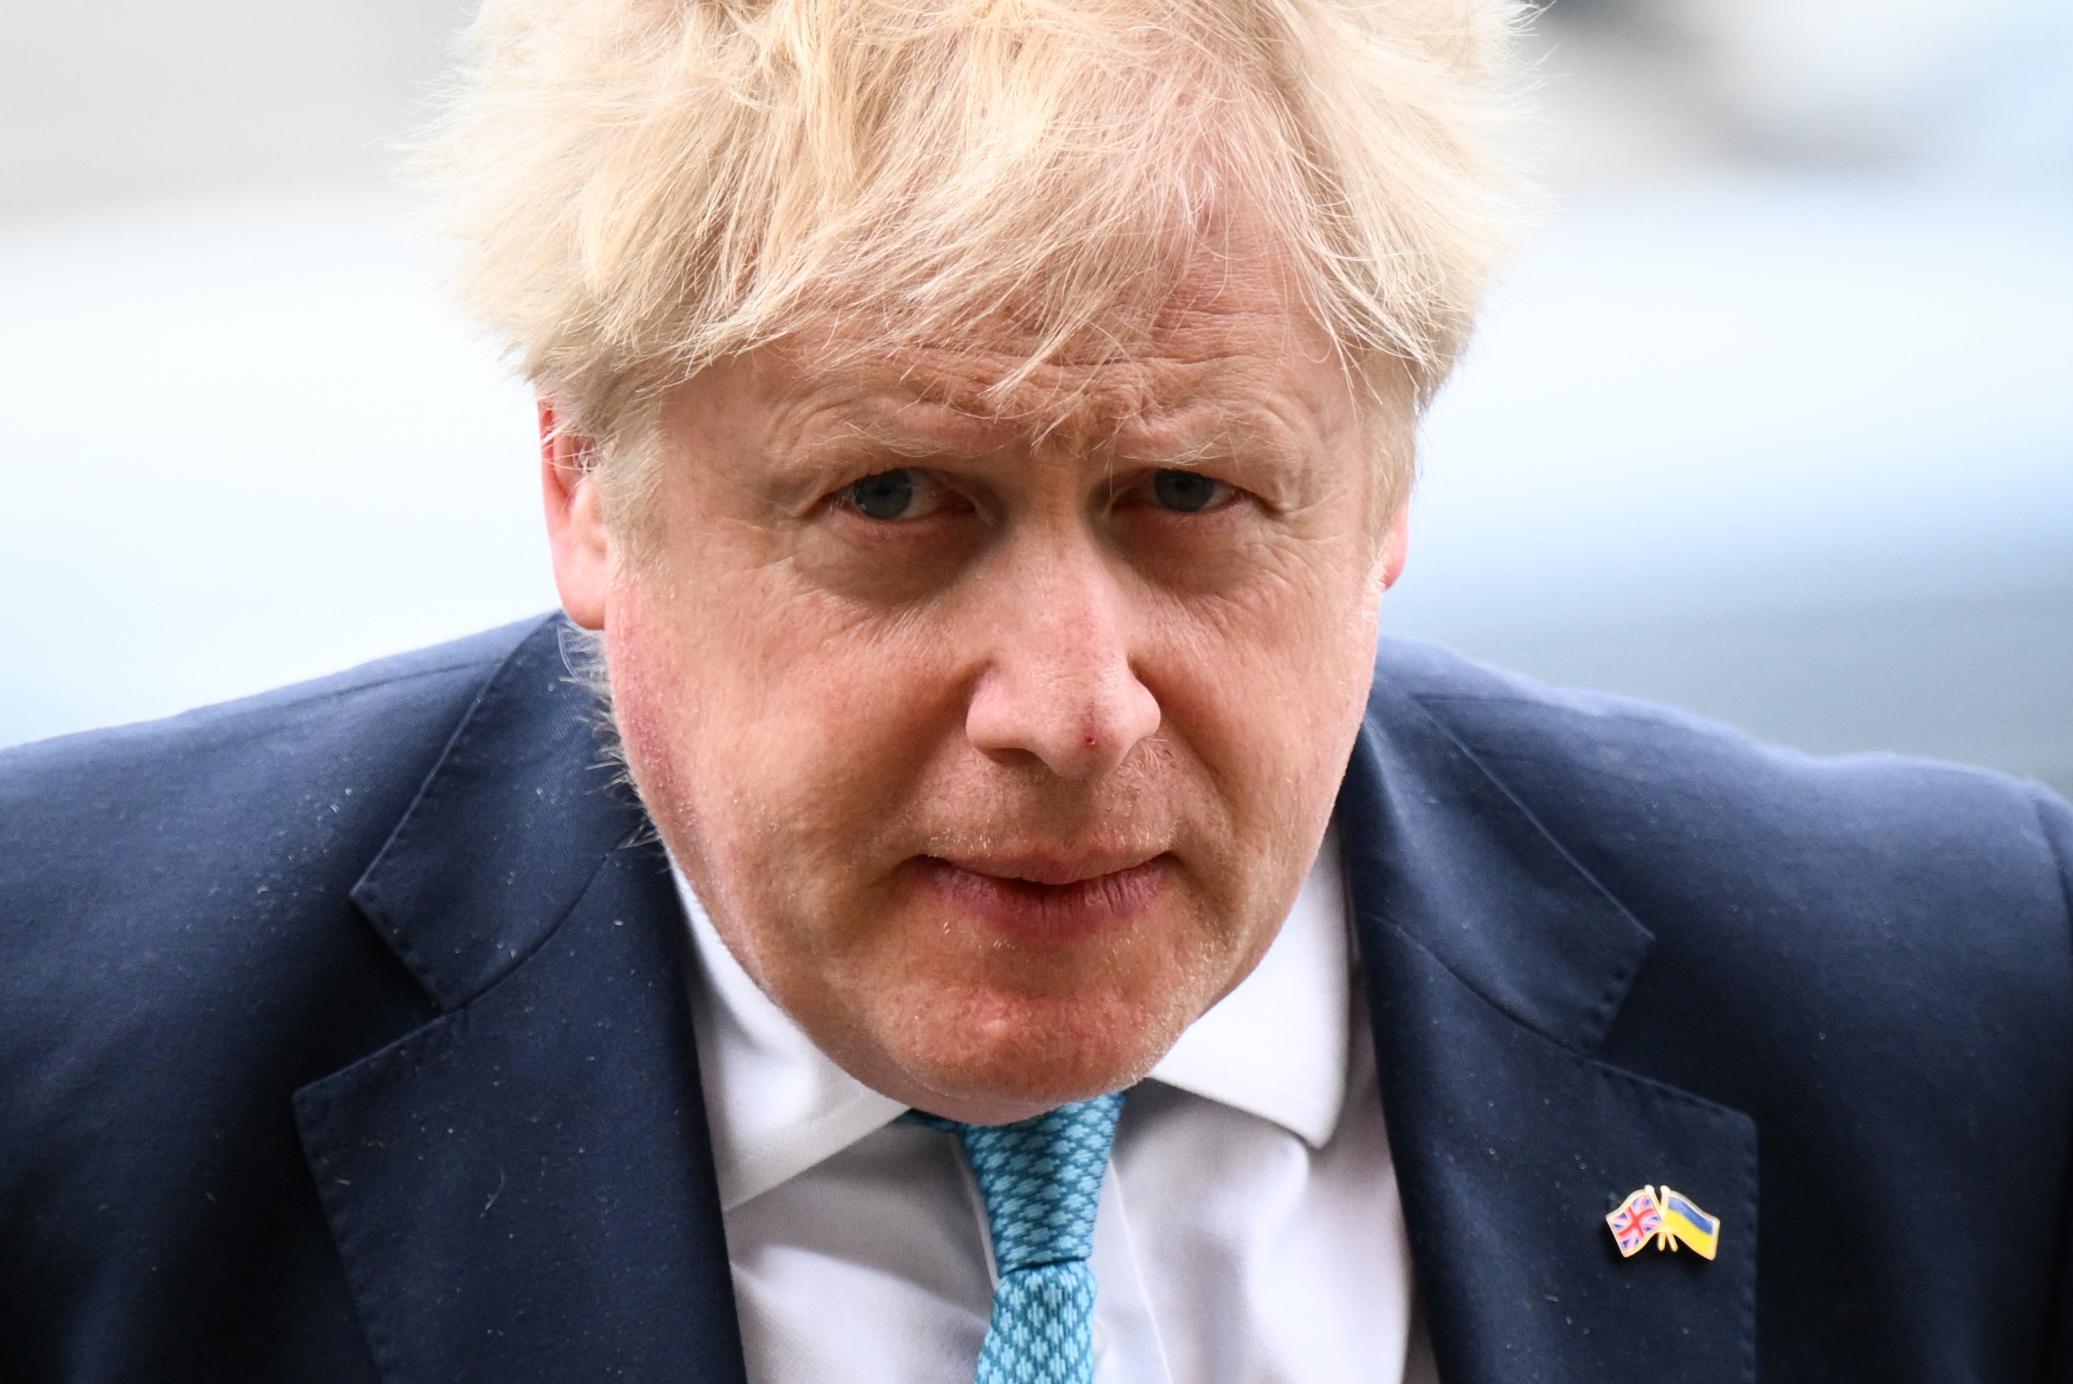 During the peak of the pandemic: “Boris Johnson contemplated military operation on Dutch vaccine plant”